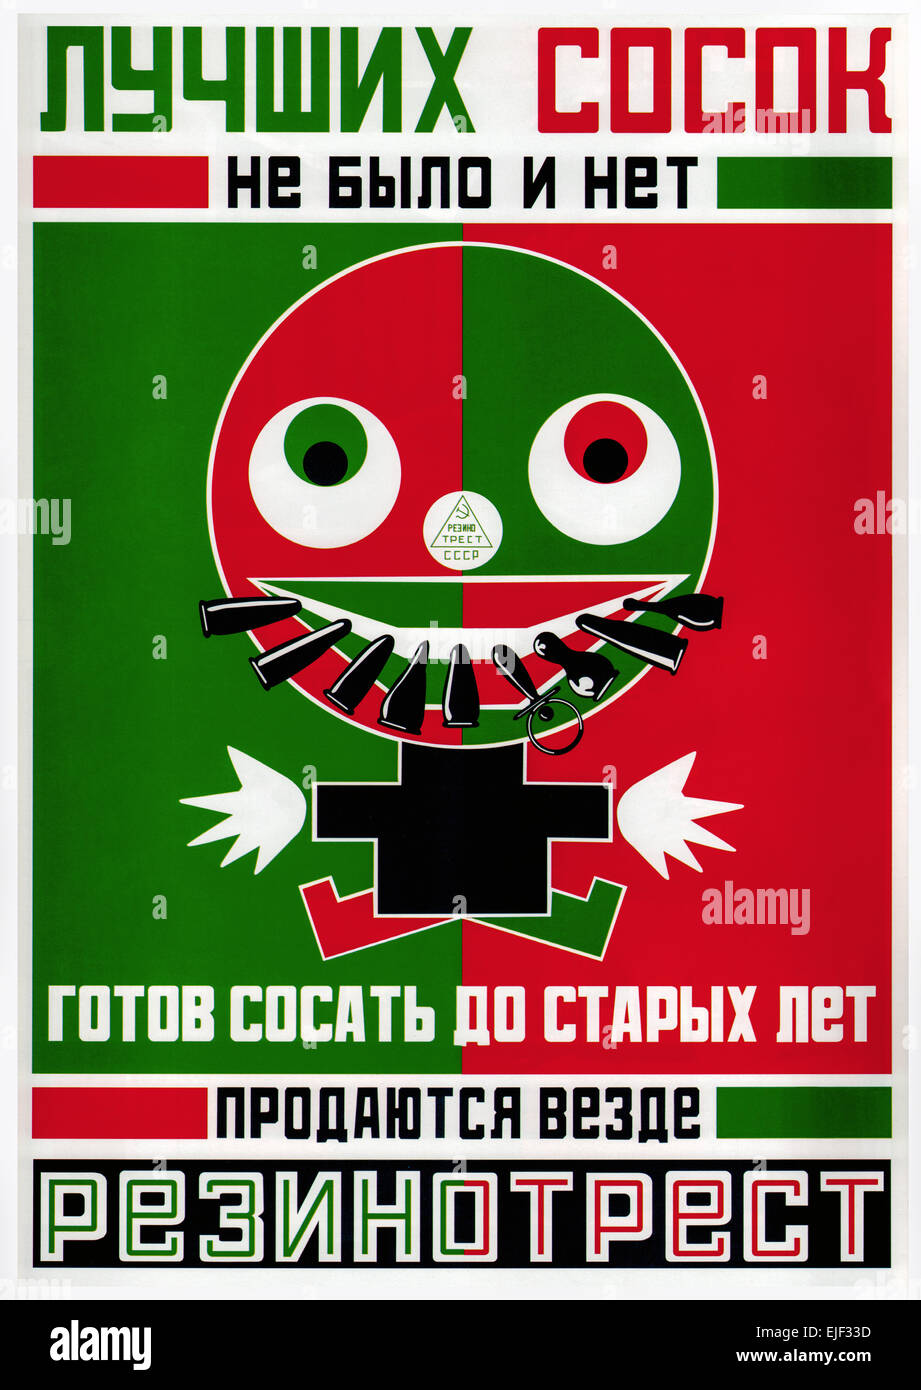 Poster for Rezinotrest (Soviet rubber-industry trust) 'There never were and never will be better pacifiers. Willing to suck (on the pacifiers) until old age. Sold everywhere. Rezinotrest' 1923 designed by Alexander Rodchenko (1891-1956). Stock Photo